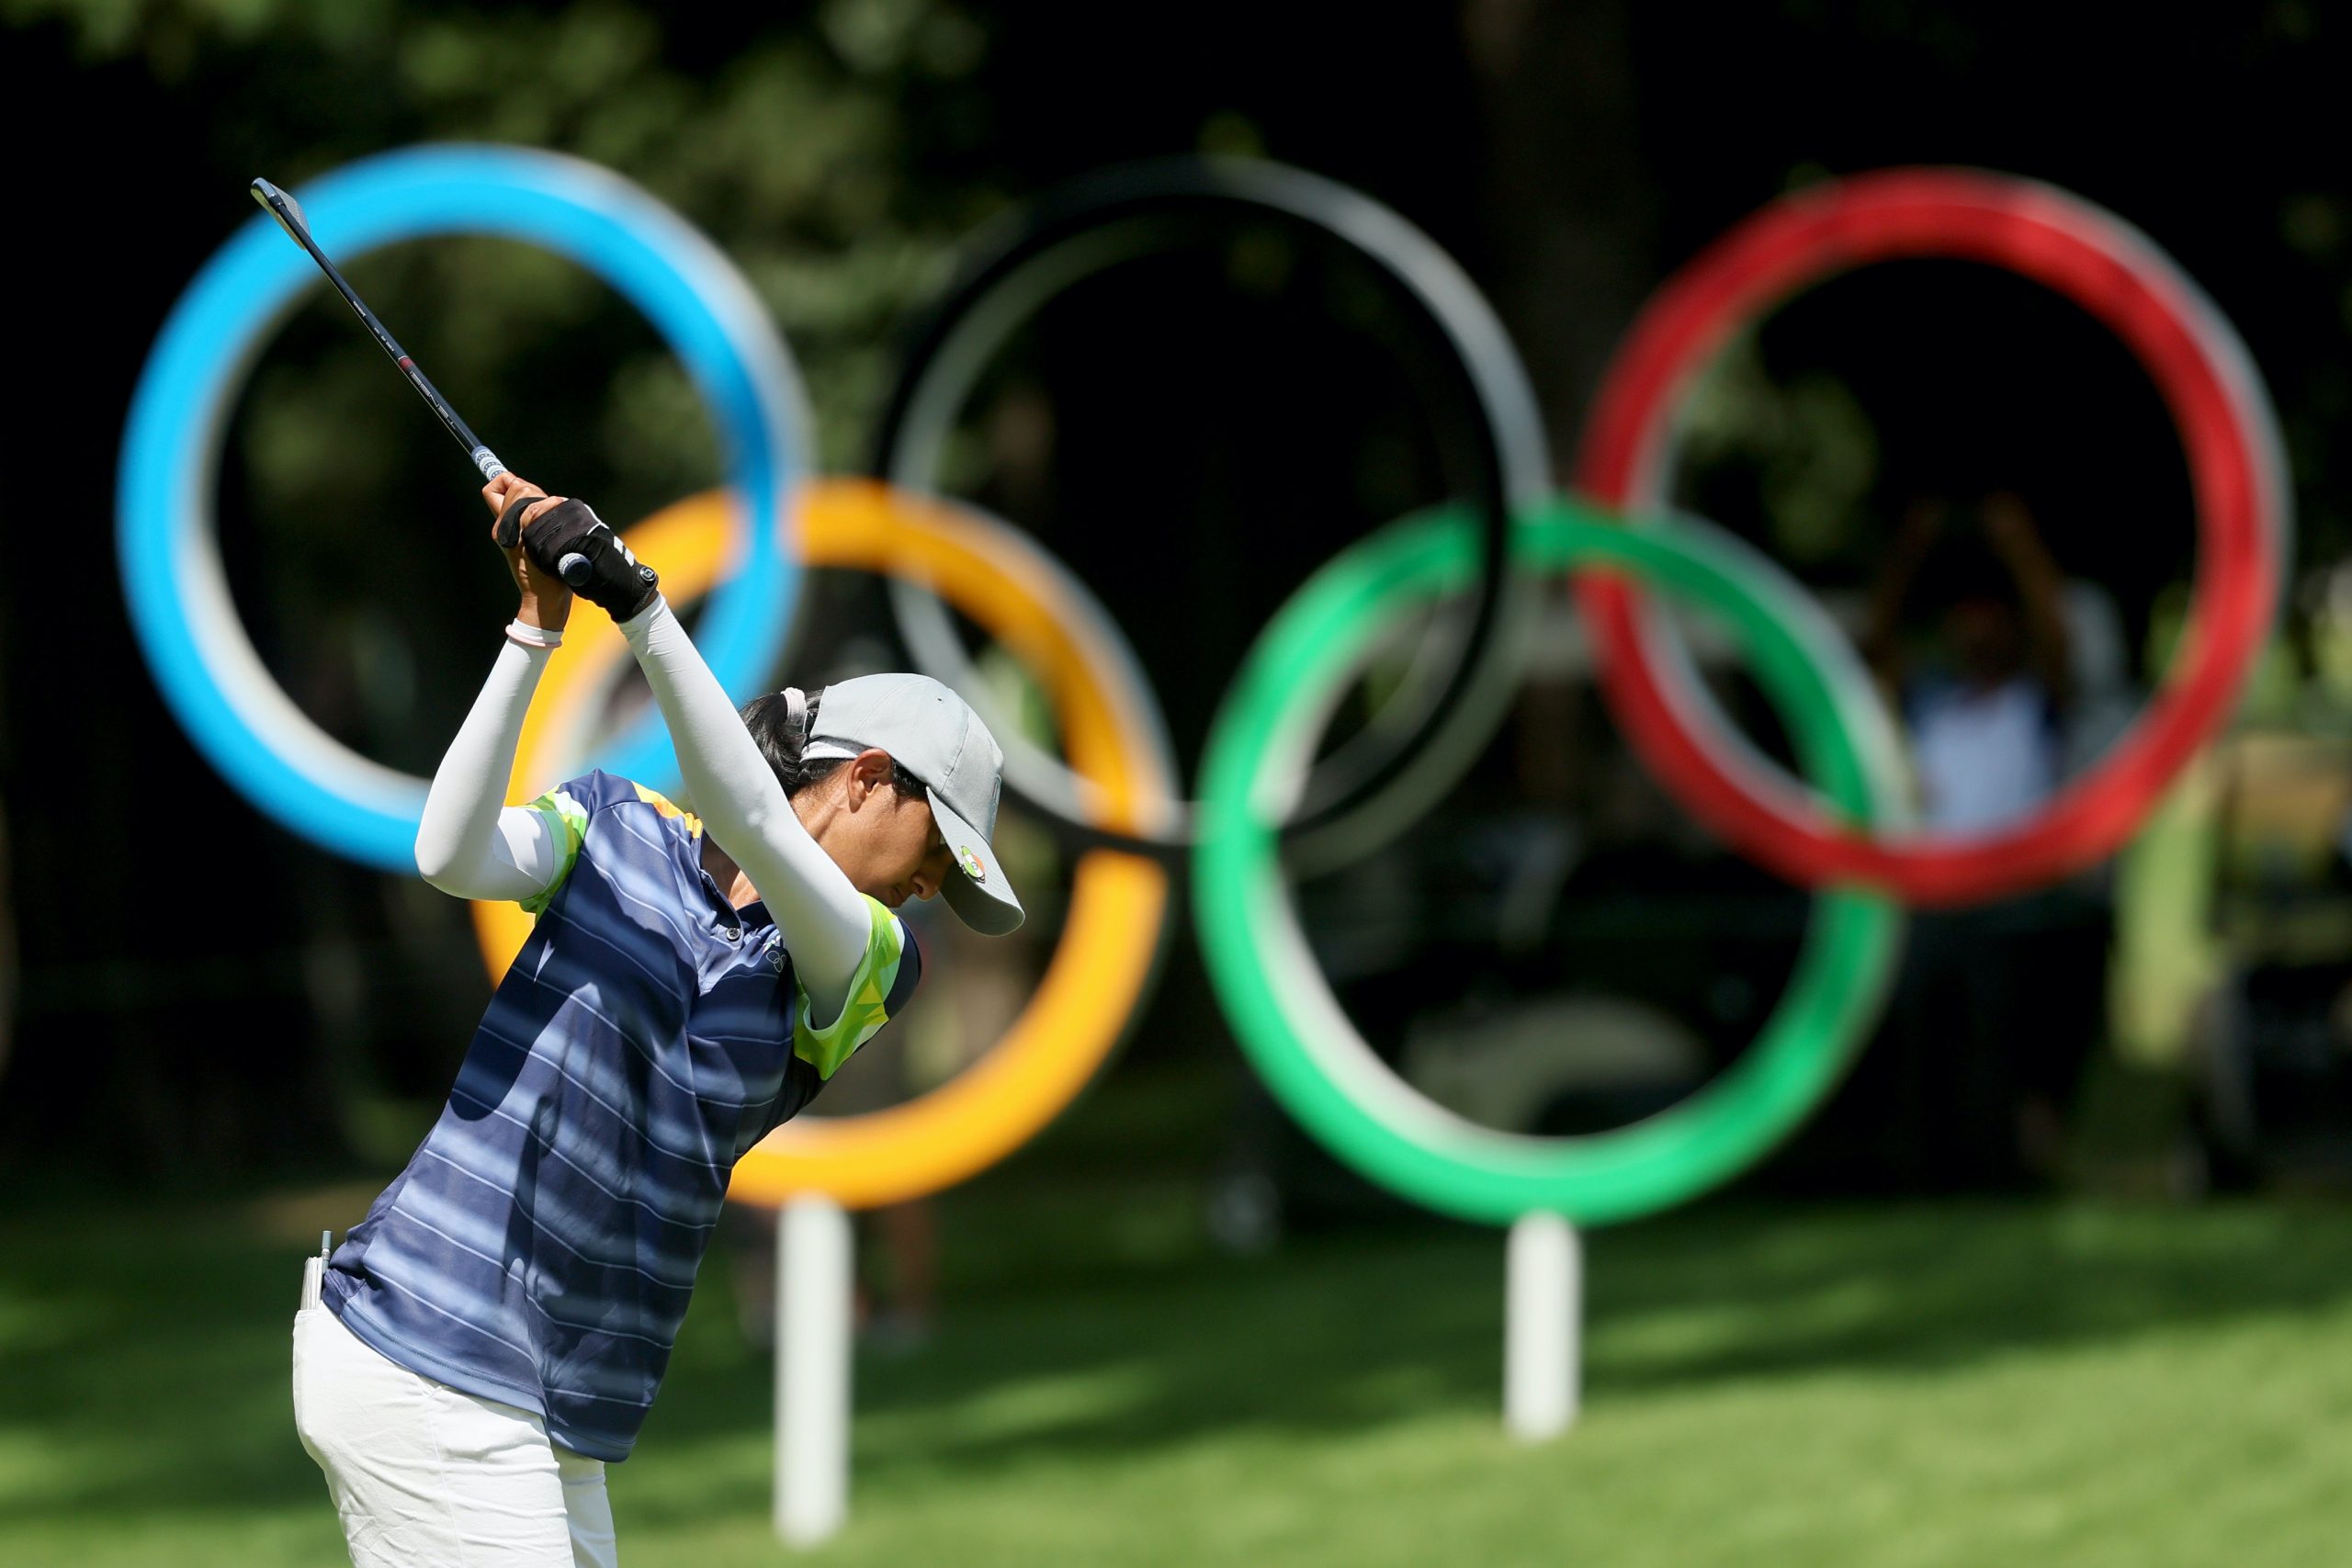 Golfer Aditi Ashok and Athlete Neeraj Chopra will be on the verge of becoming India's maiden Olympic medallists on August 8.